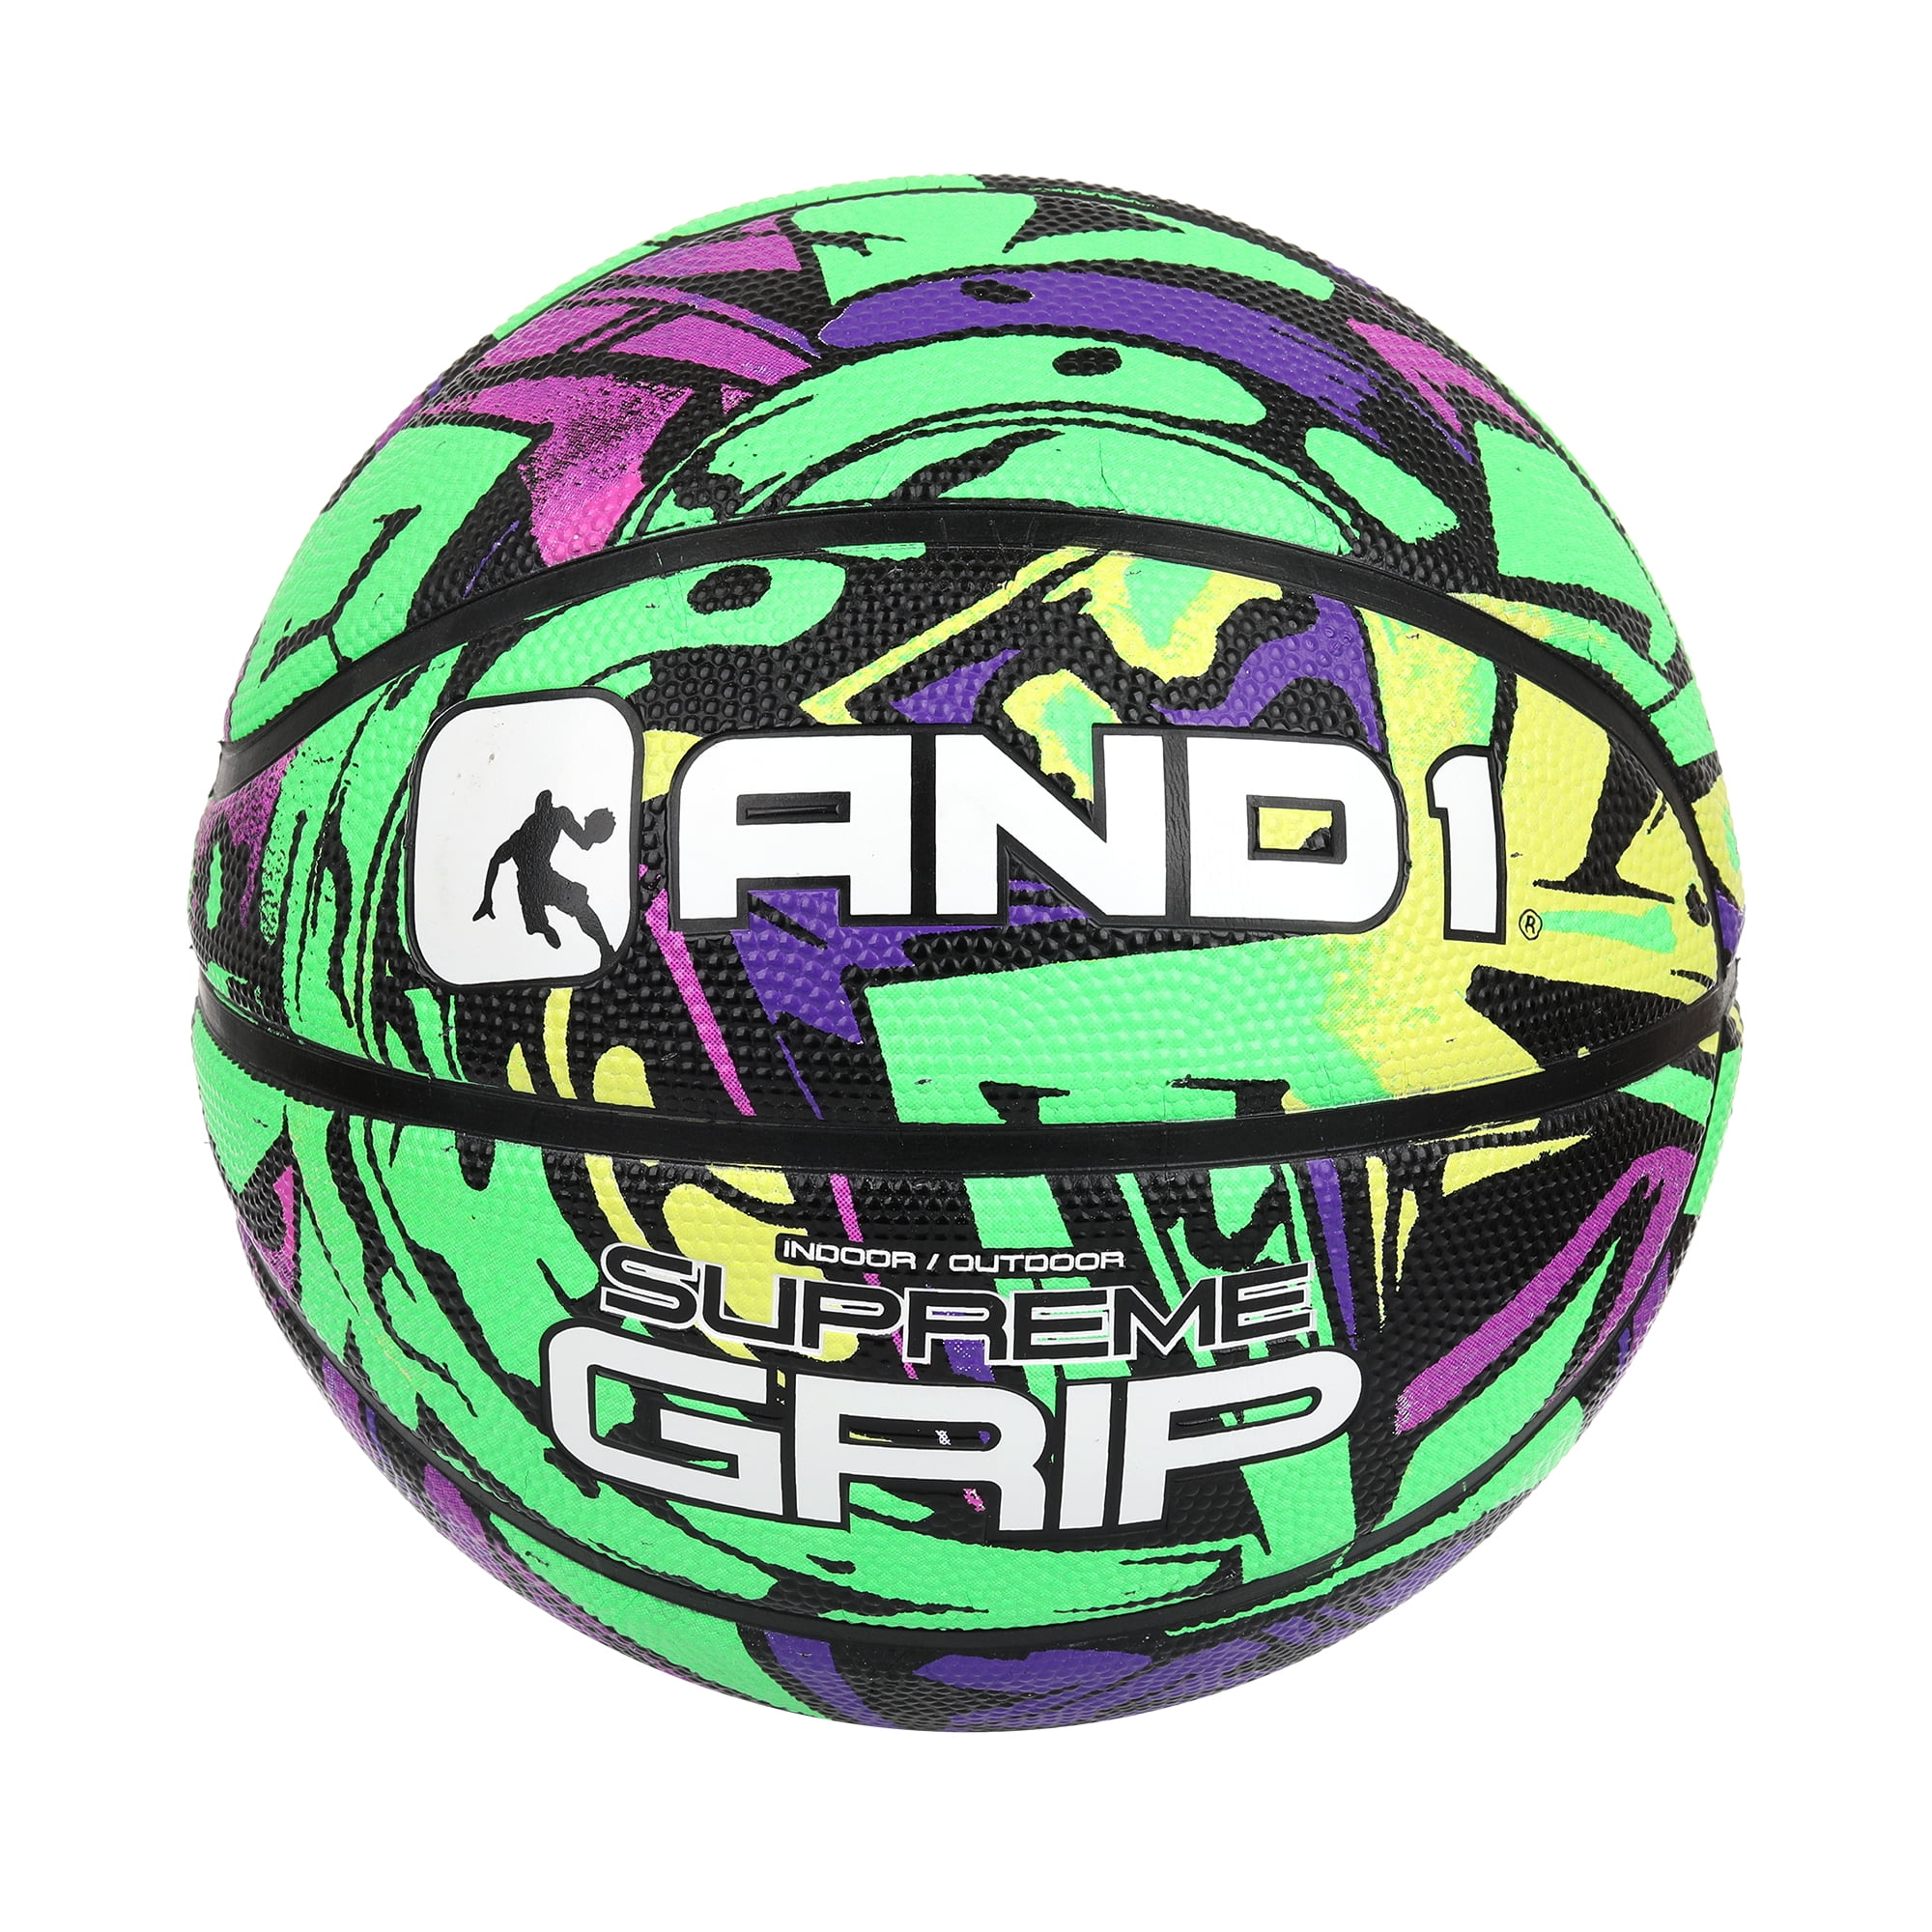 PP PICADOR Kids Football Size 3 Grip Rugby Ball for Kid Boys Girls Gift with Pump Ideal Toss Kick Practice-Indoor Outdoor use